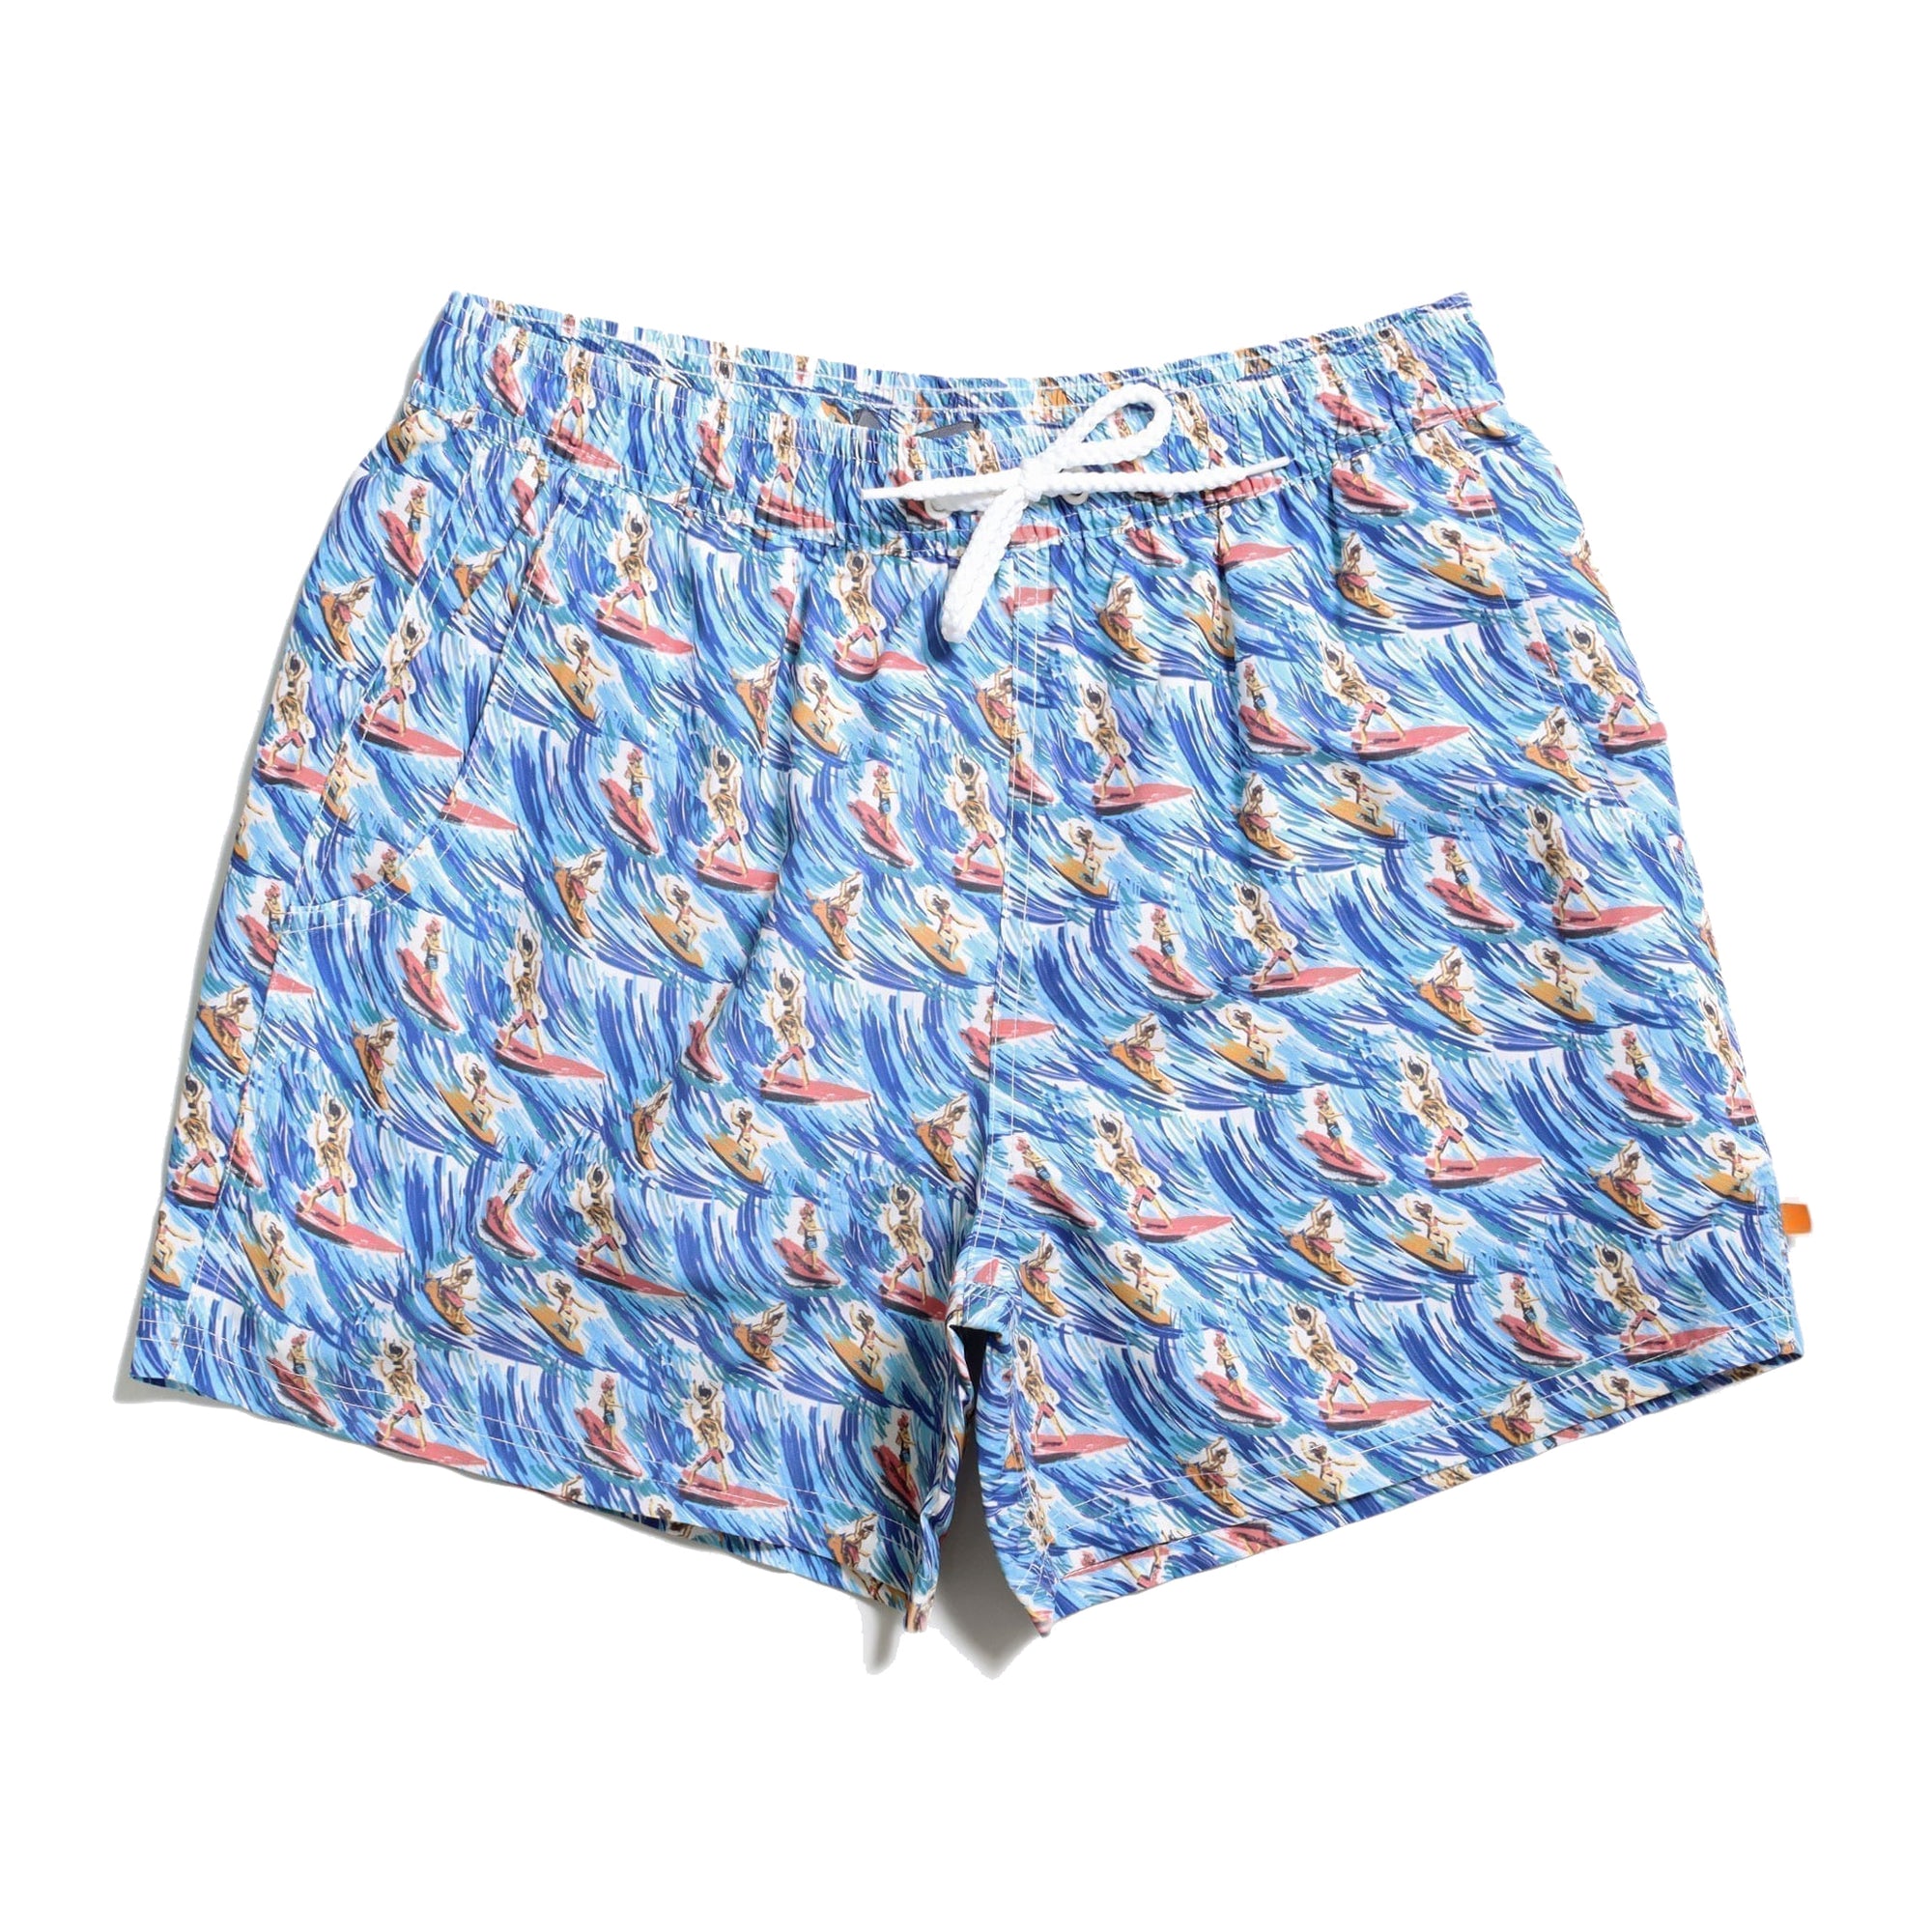 Printed Swimshorts SLIPSTREAM
Drawstring swim shorts that are good for the planet and your image. Made from a lightweight, quick-dry fabric that’s crafted from recycled plastic bottles. These beauties feature two side seam pockets, a pocket on the rear, soft mesh lining, and a drawstring waist.
– 100% Recycled Polyester– Regular fit, true to size FAR AFIELD